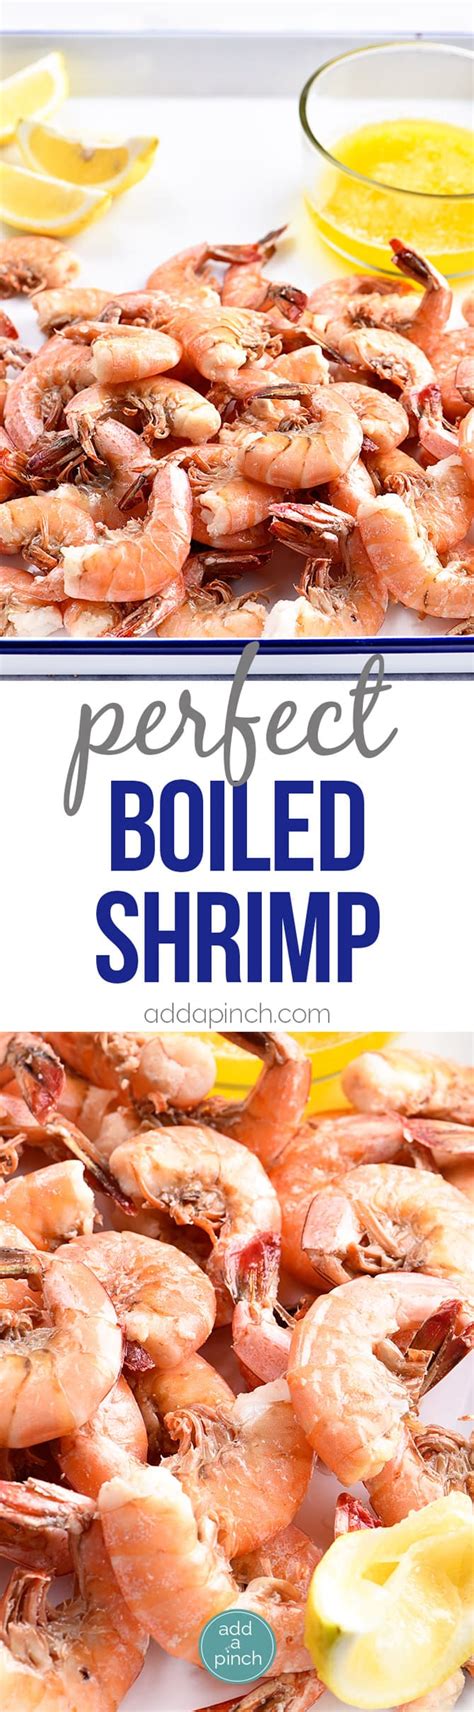 They're also good tossed into a salad for a hot summer day's cooler meal. Boiled Shrimp Recipe - Add a Pinch